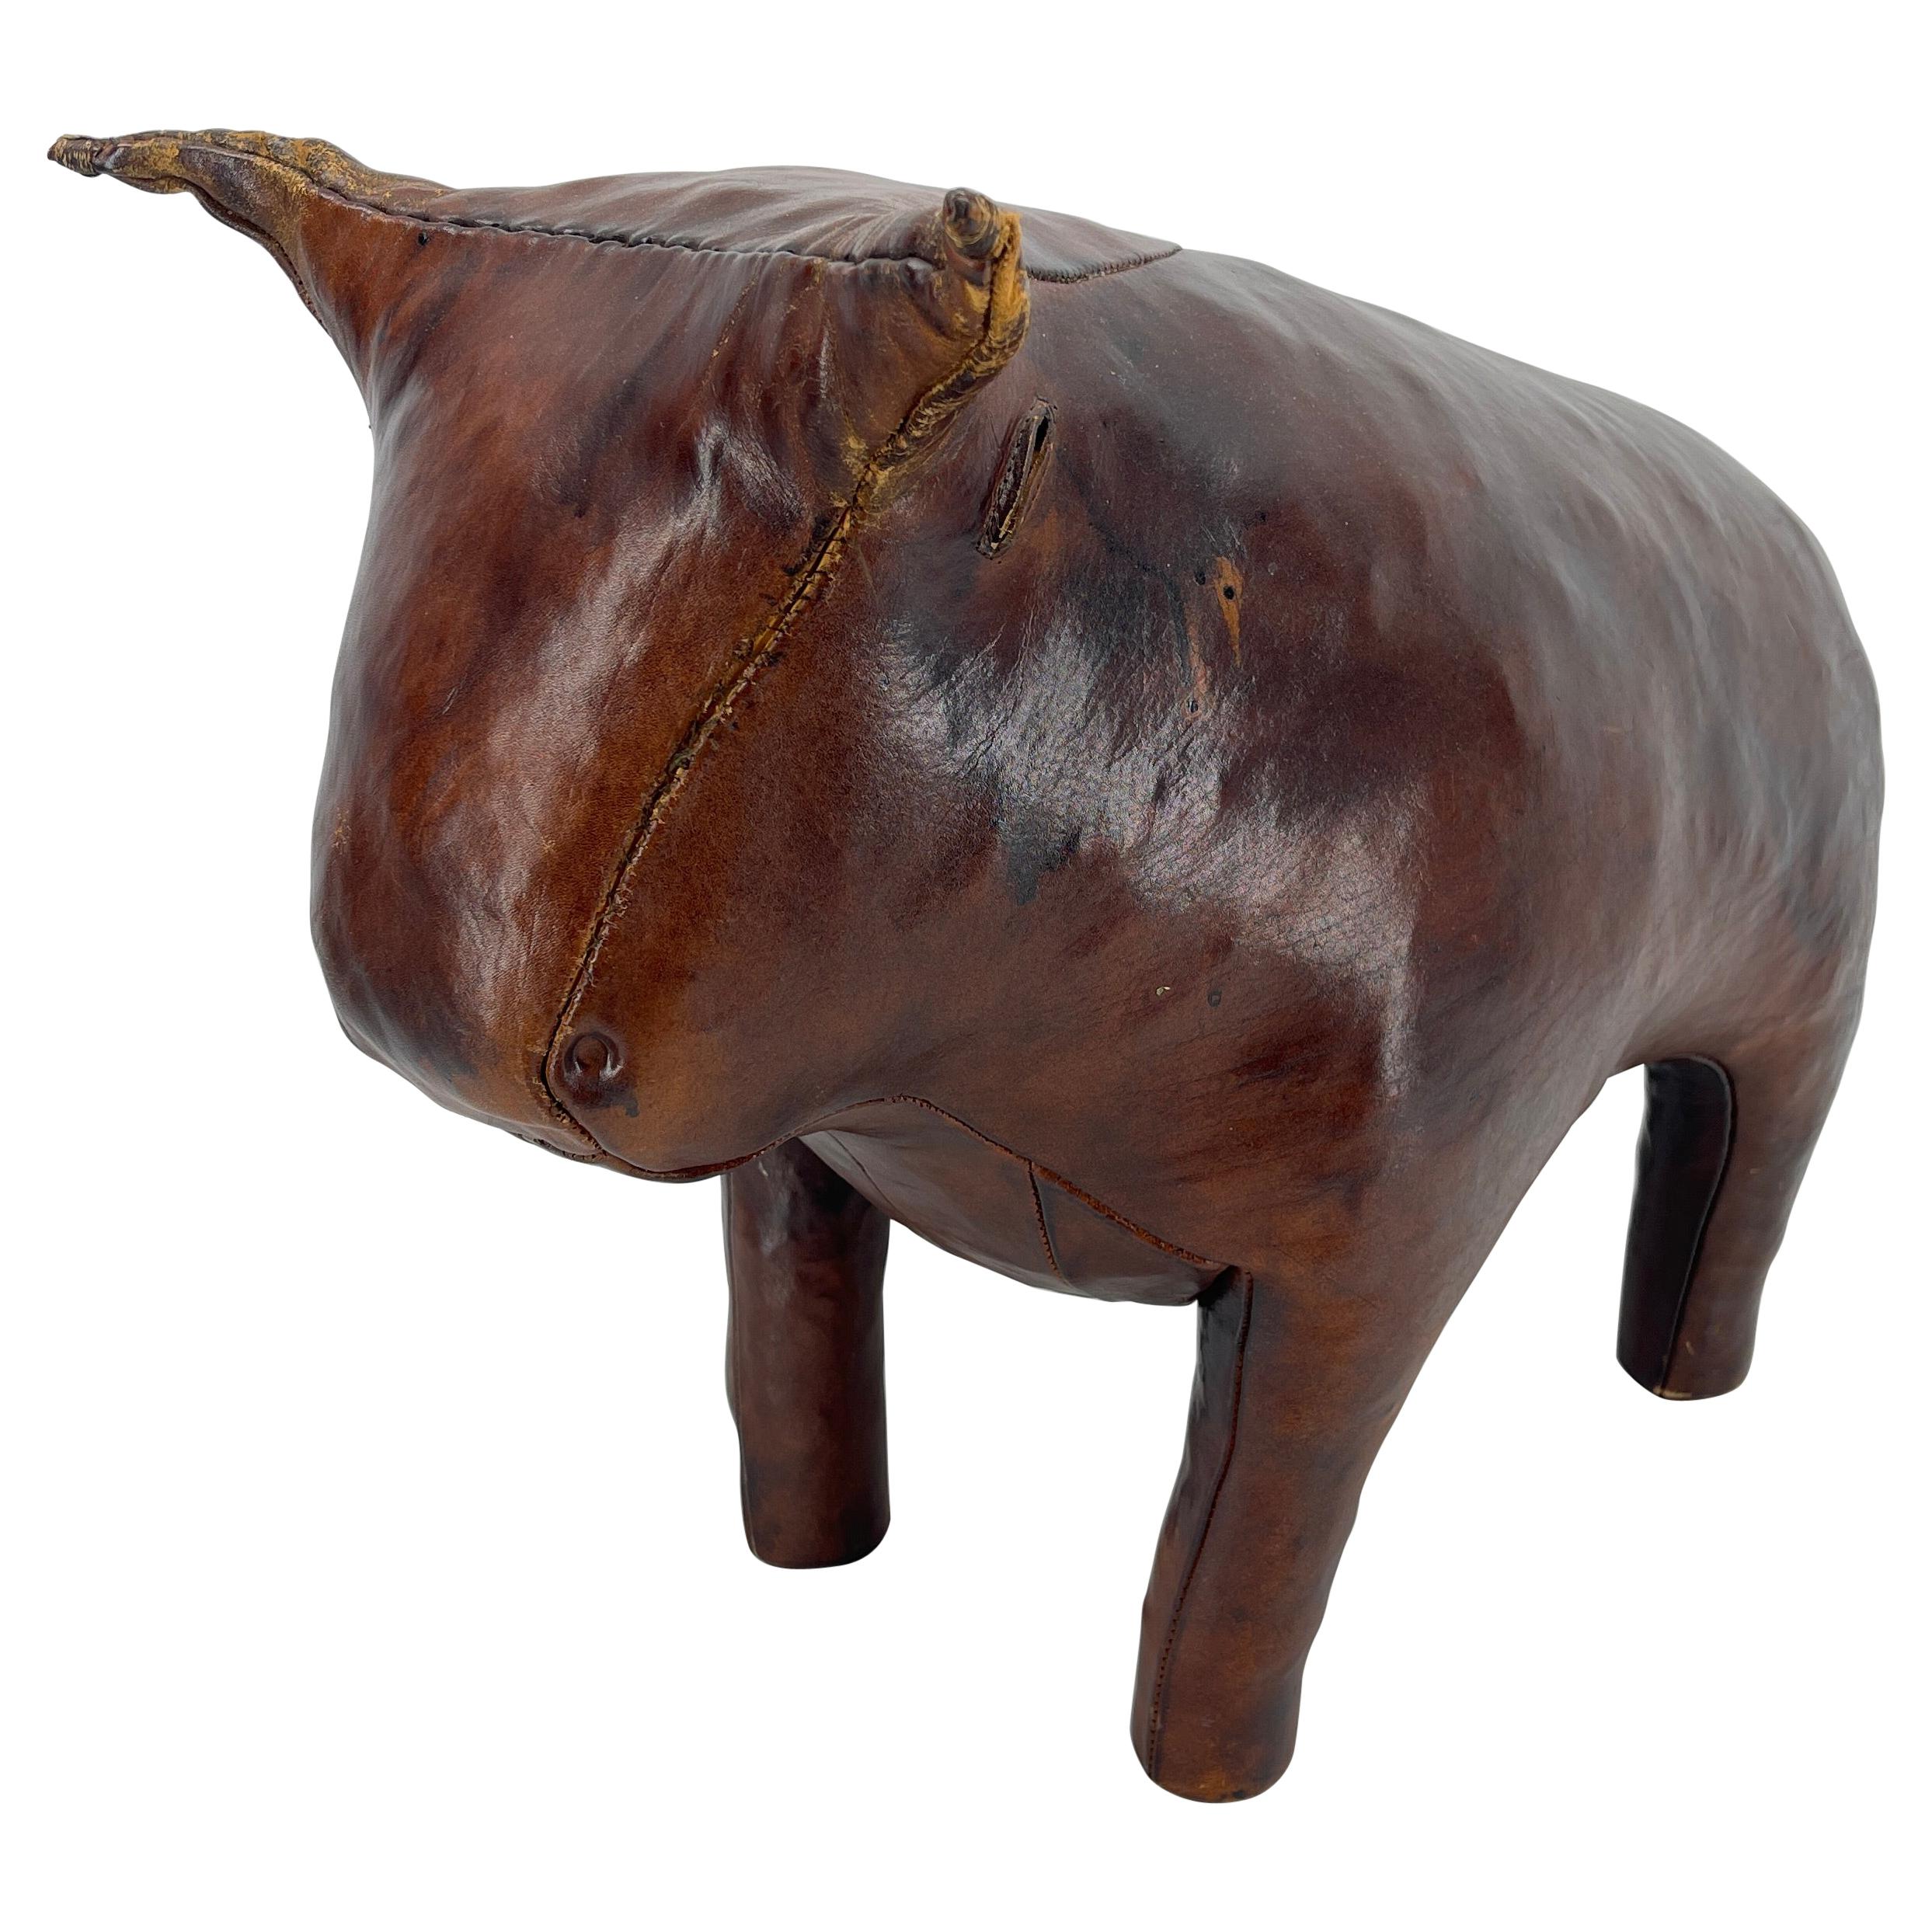 Abercrombie & Fitch Leather Bull Statue Footstool, Mid-Century Modern